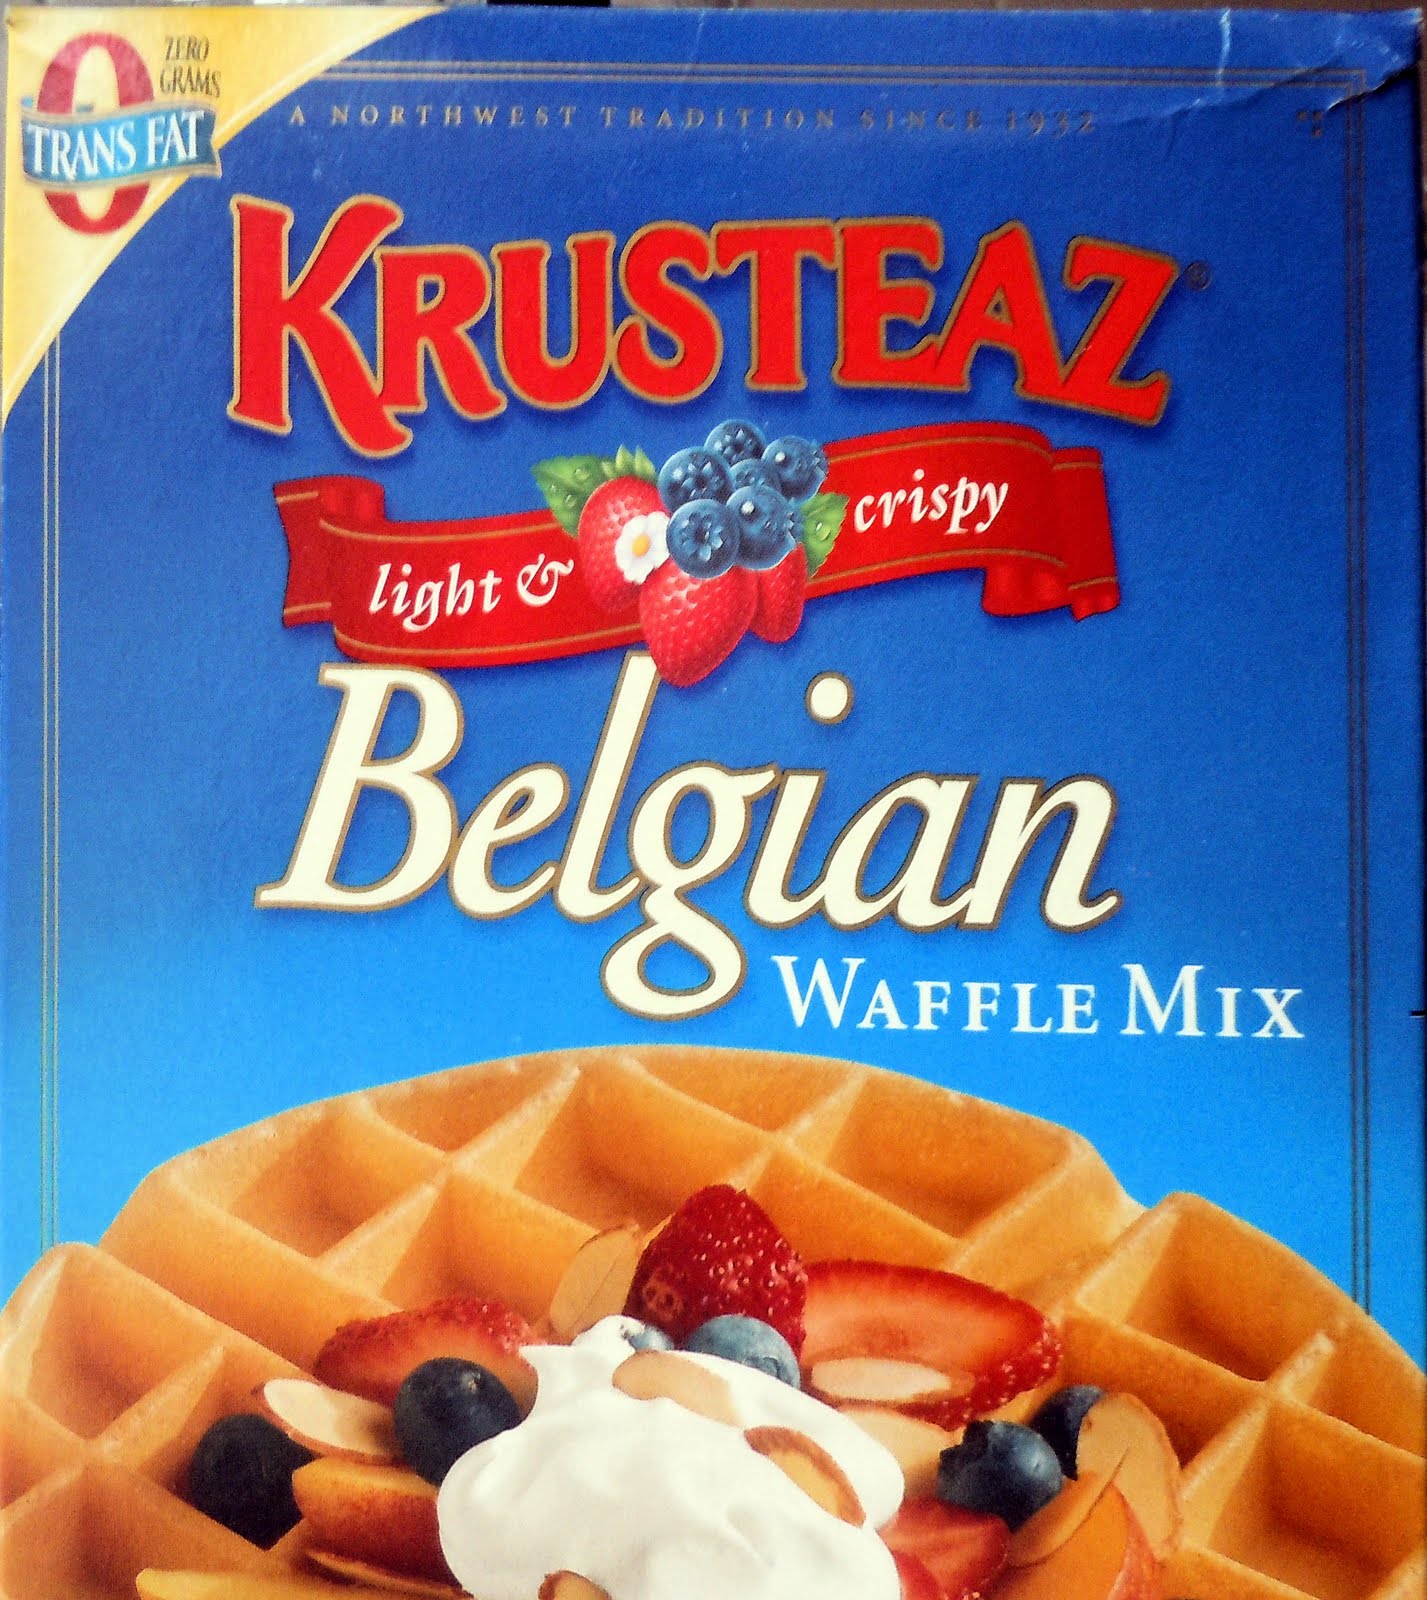 Waffles At make how pancakes Cooking Belgian Seed mix Lemon What's to with Cathy's?: waffle  Poppy krusteaz